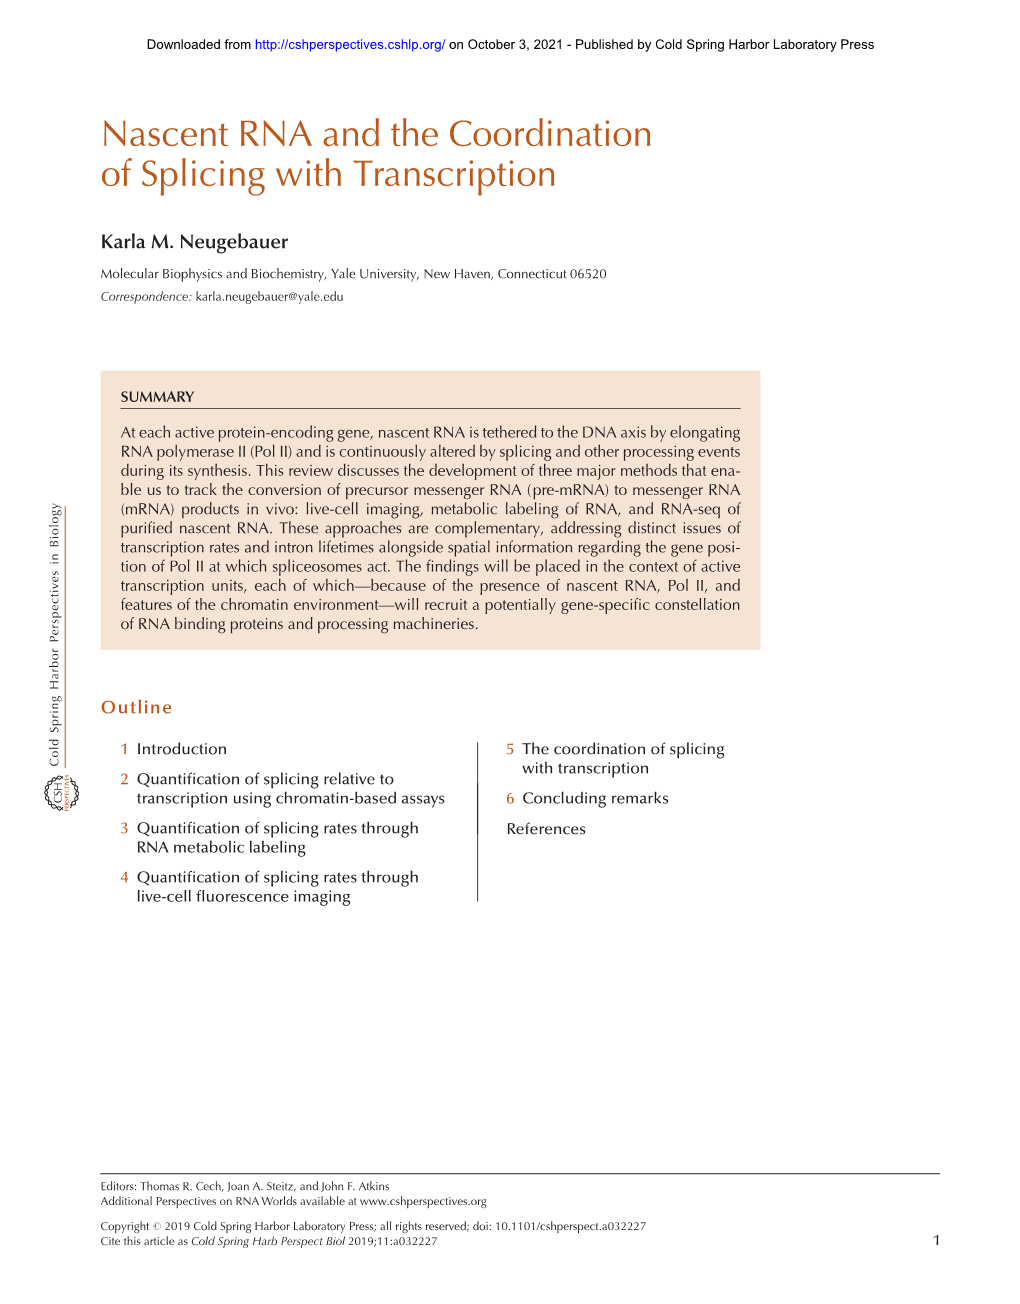 Nascent RNA and the Coordination of Splicing with Transcription